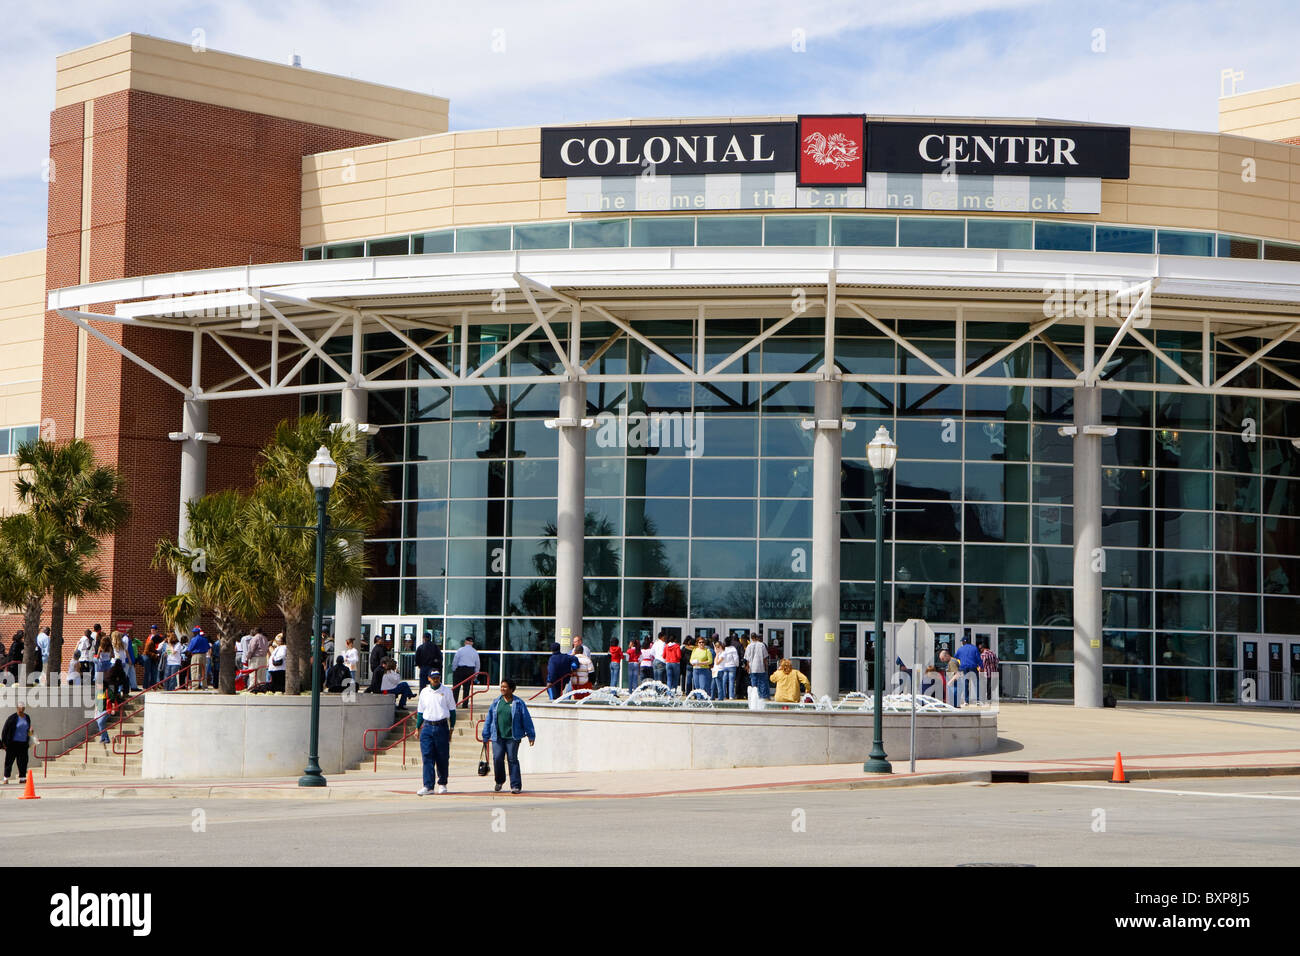 Main entrance of the Colonial Center in 2007; Columbia, SC, USA. This is the largest arena in the state of South Carolina. Stock Photo